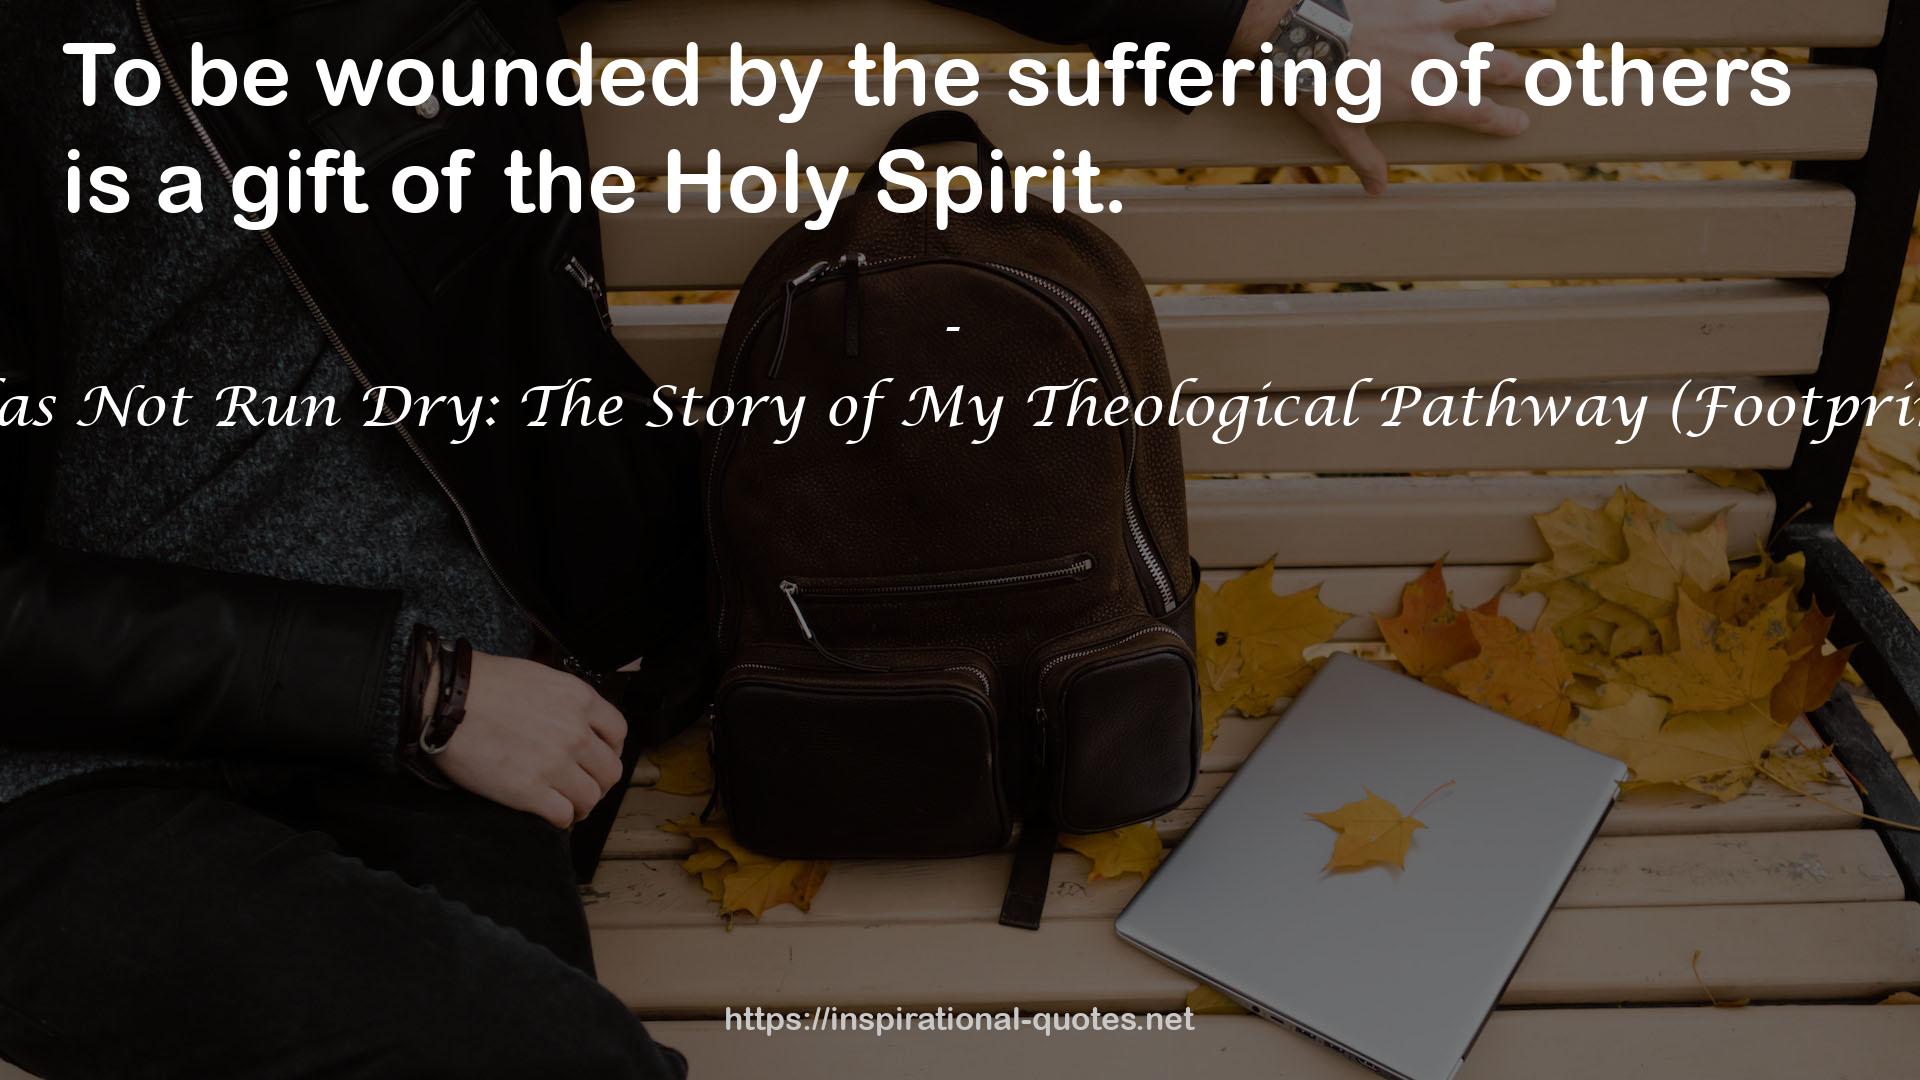 The Oil Has Not Run Dry: The Story of My Theological Pathway (Footprints Series) QUOTES